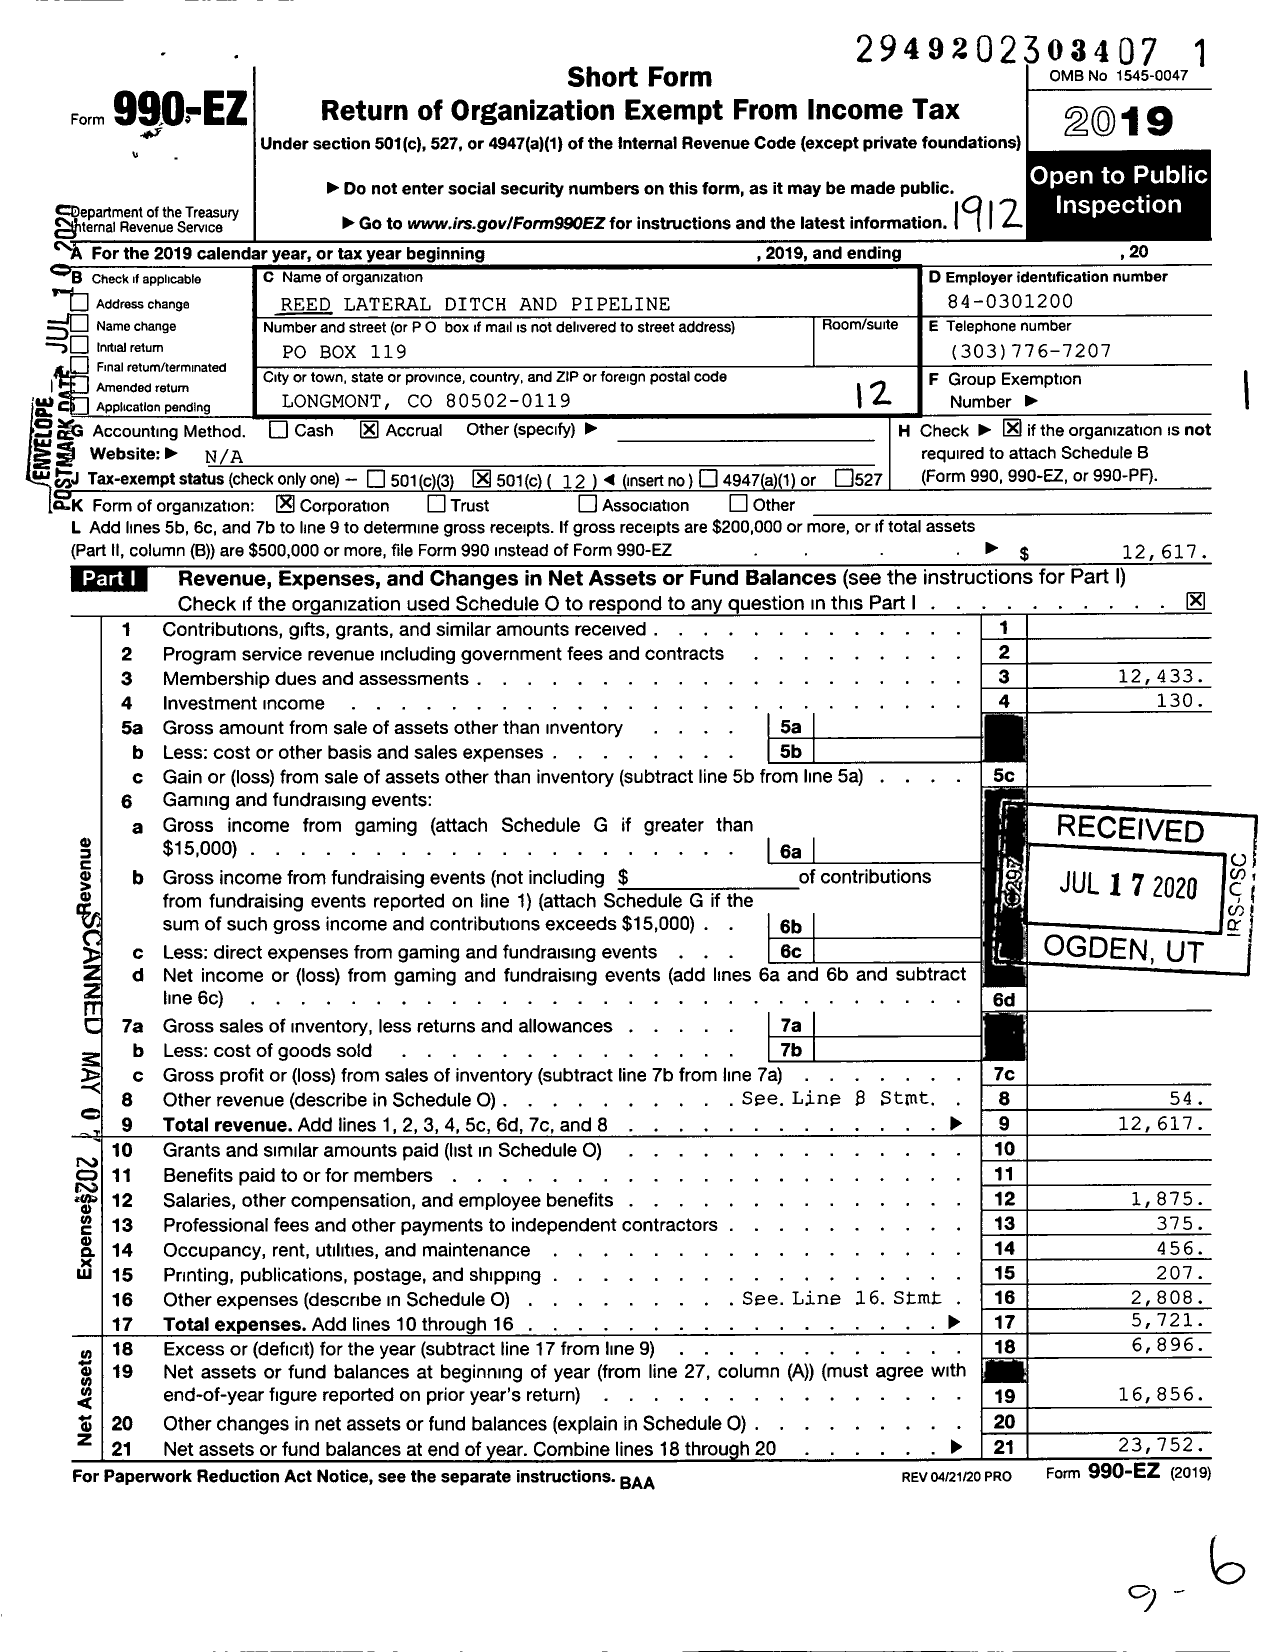 Image of first page of 2019 Form 990EO for Reed Lateral Ditch and Pipeline Company